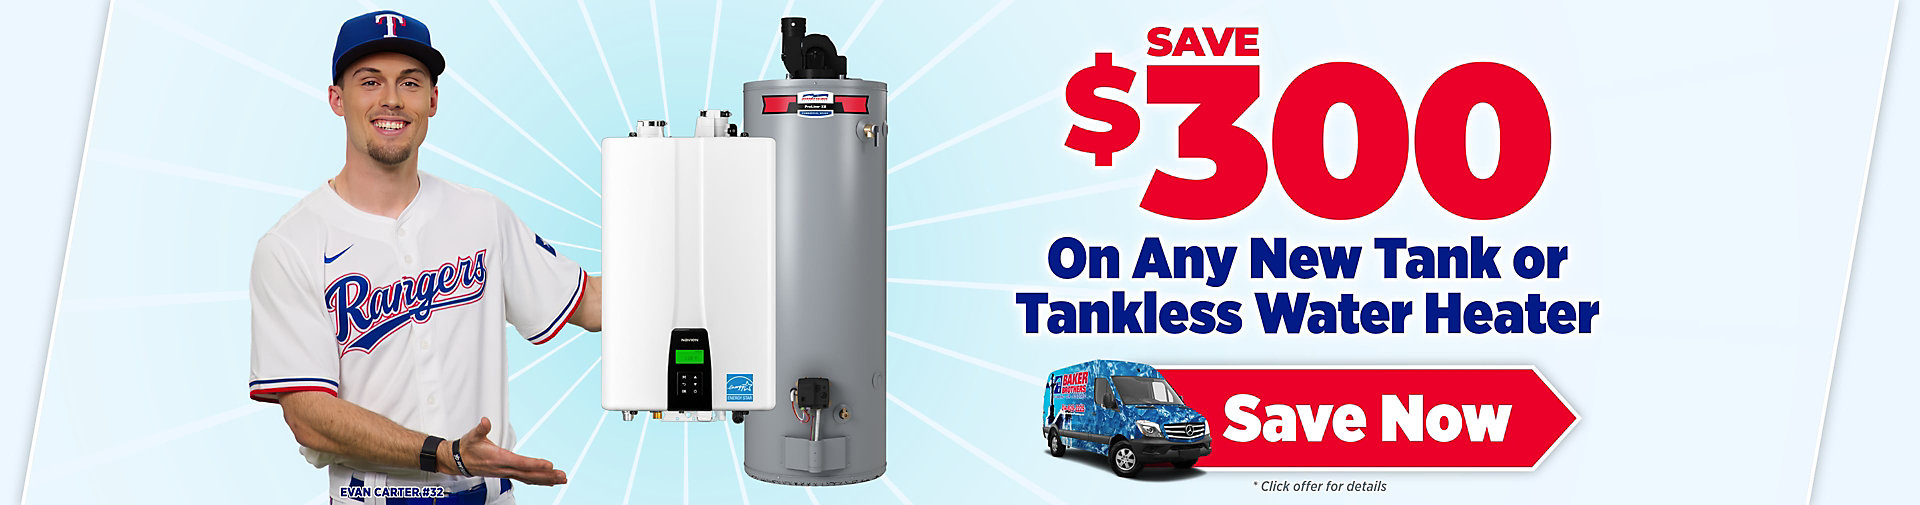 Save $300 on any new Water Heater